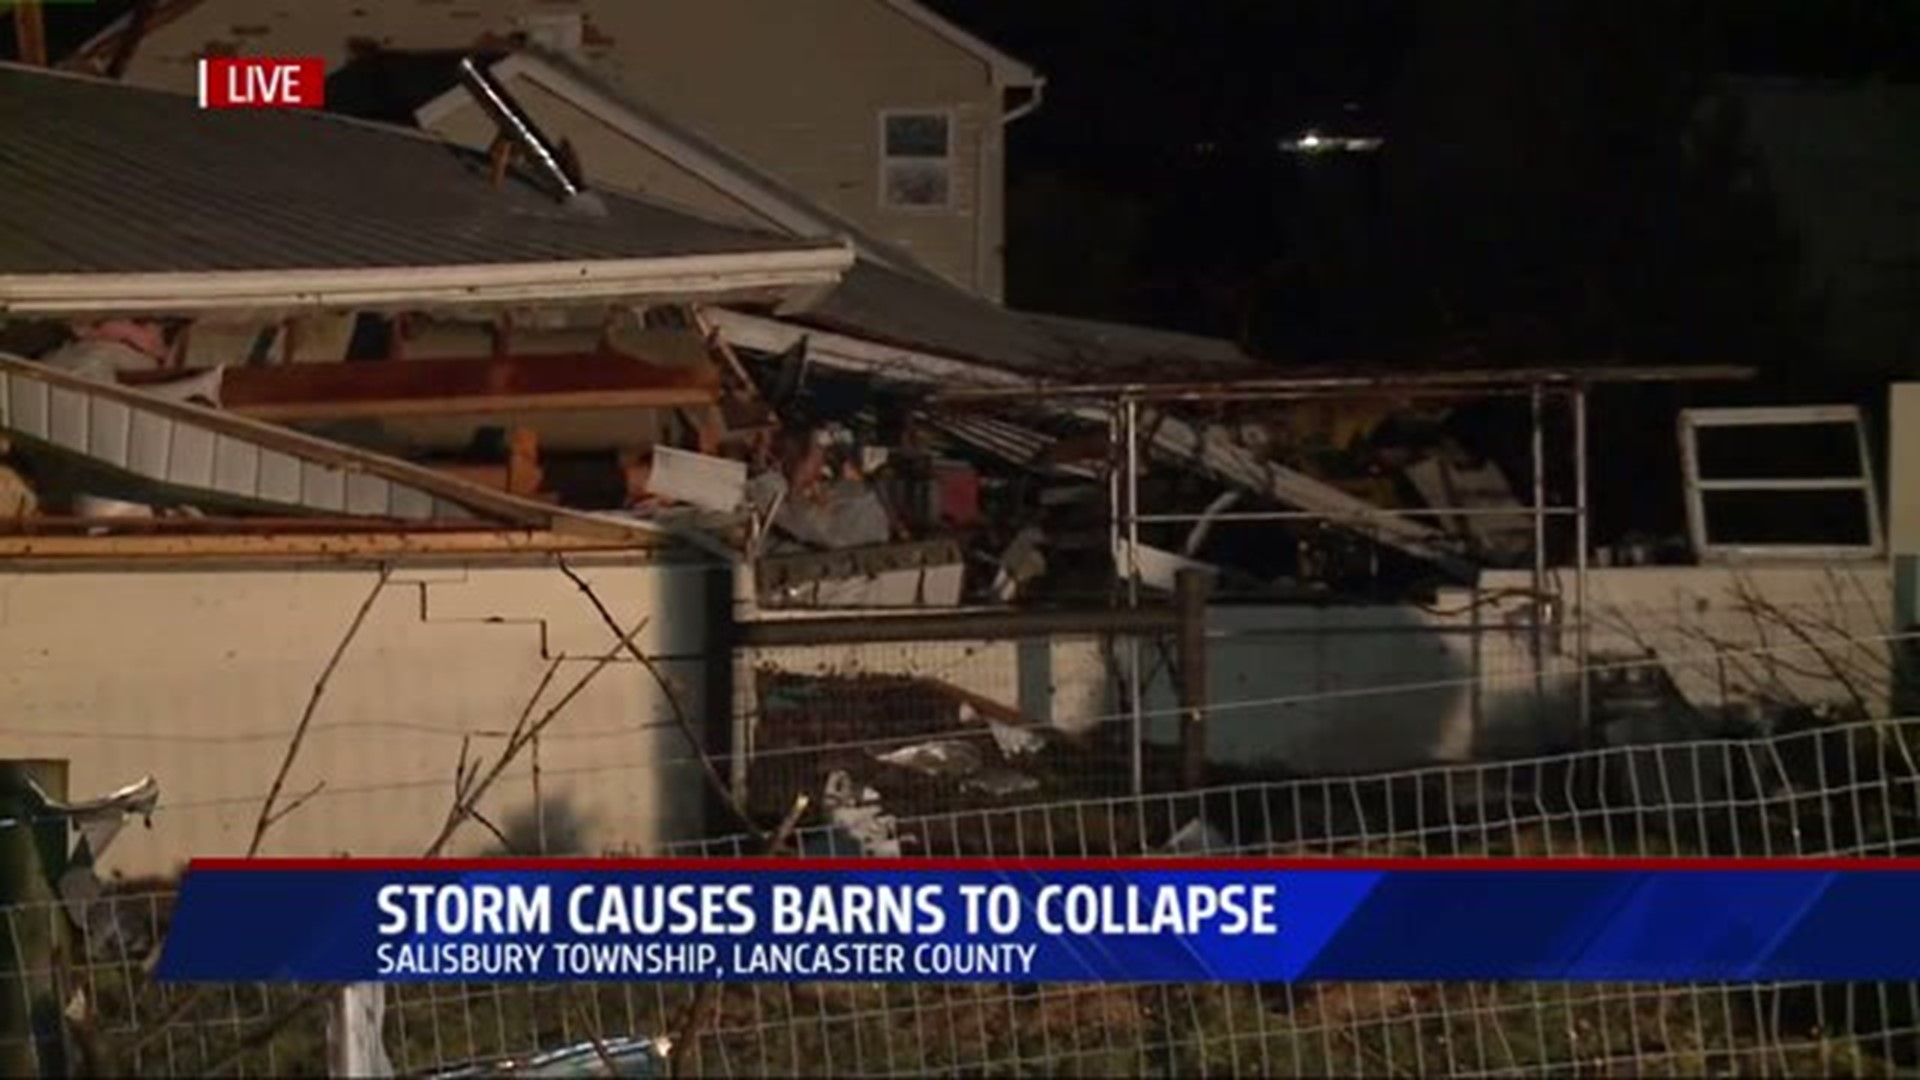 Storm causes barn to collapse